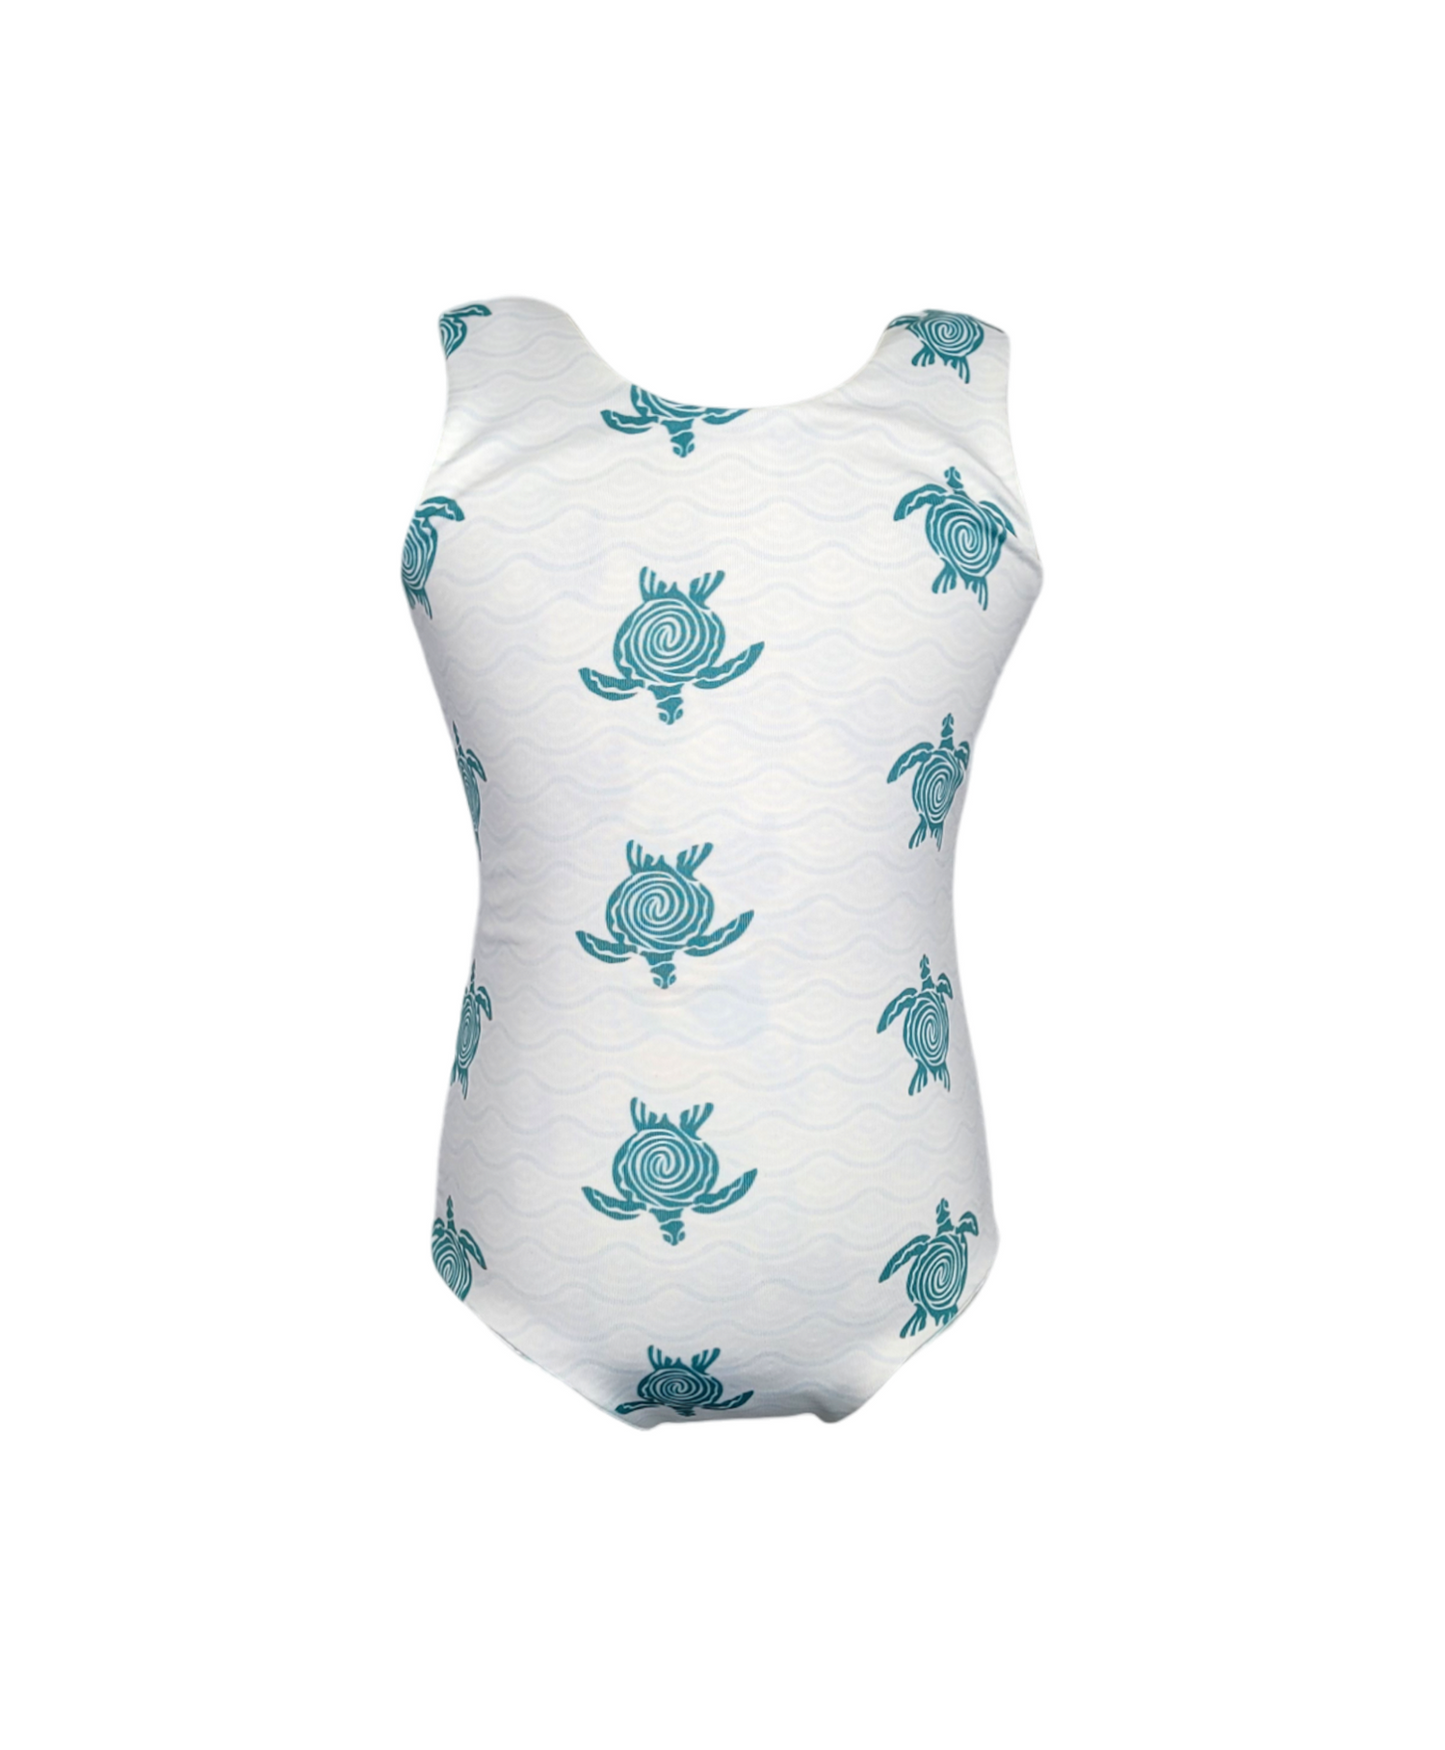 Girls reversible swimsuit. White with teal turtles.